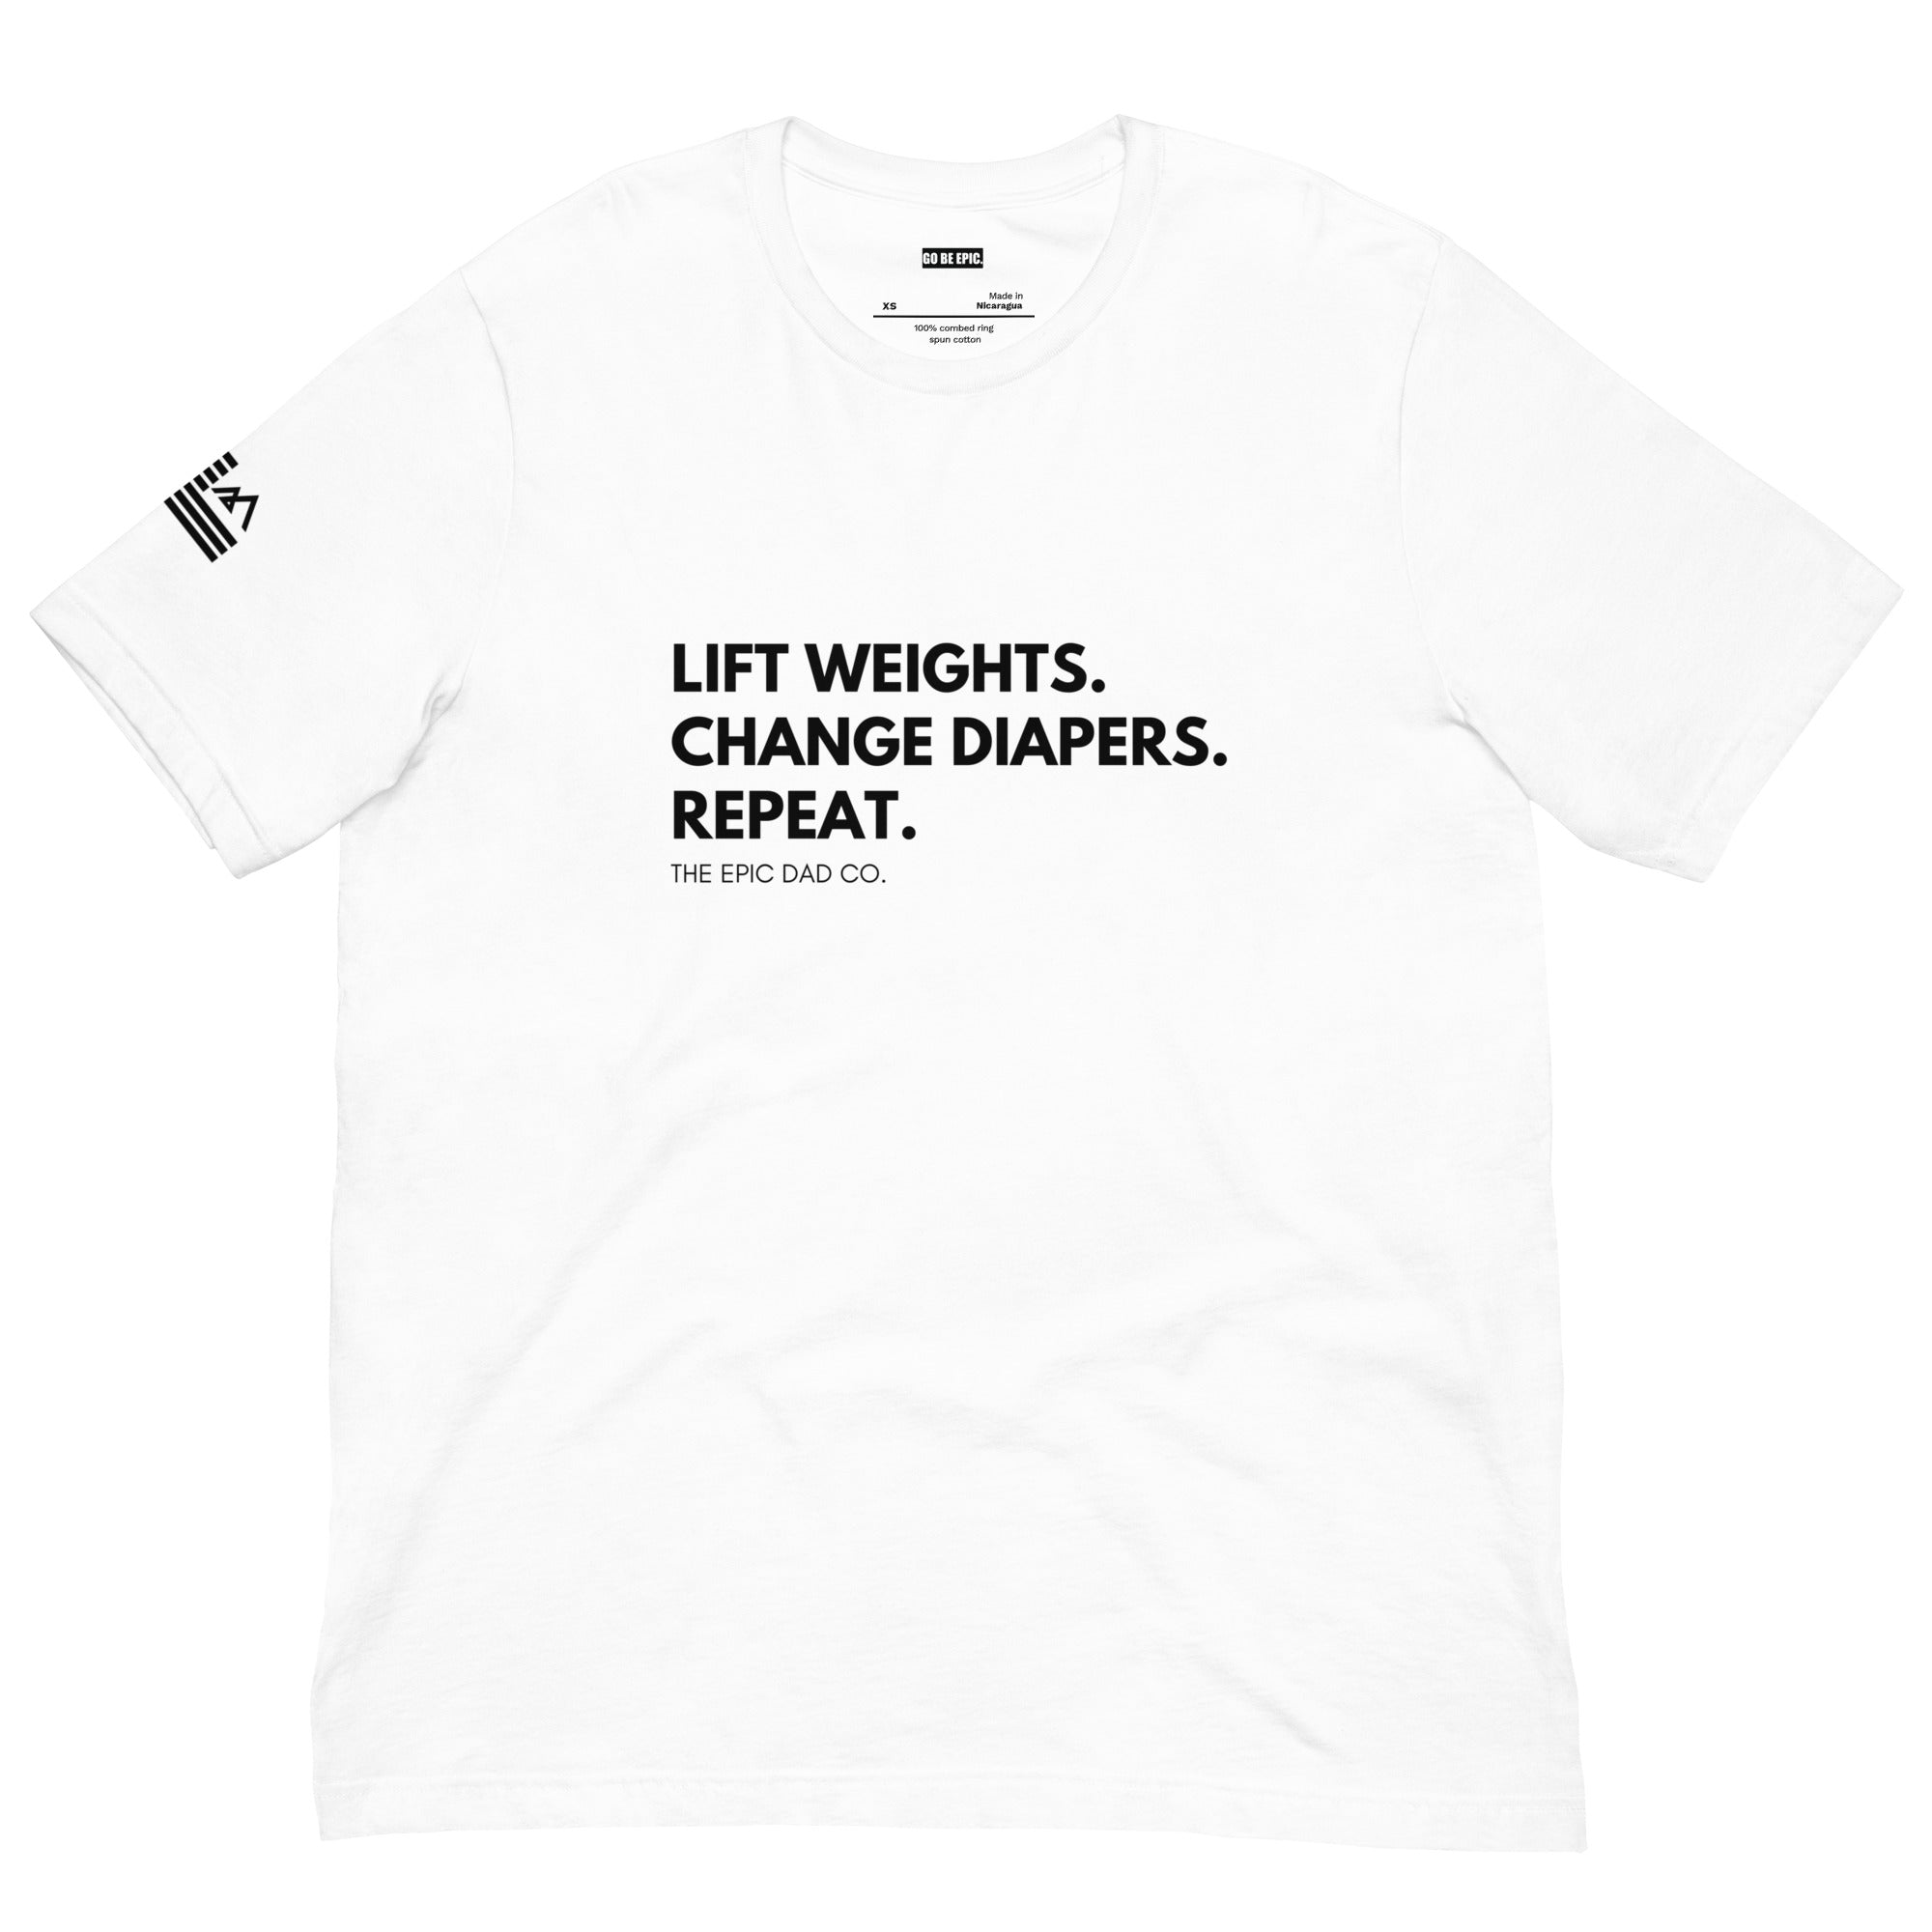 Lift Weights. Change Diapers. (Light)